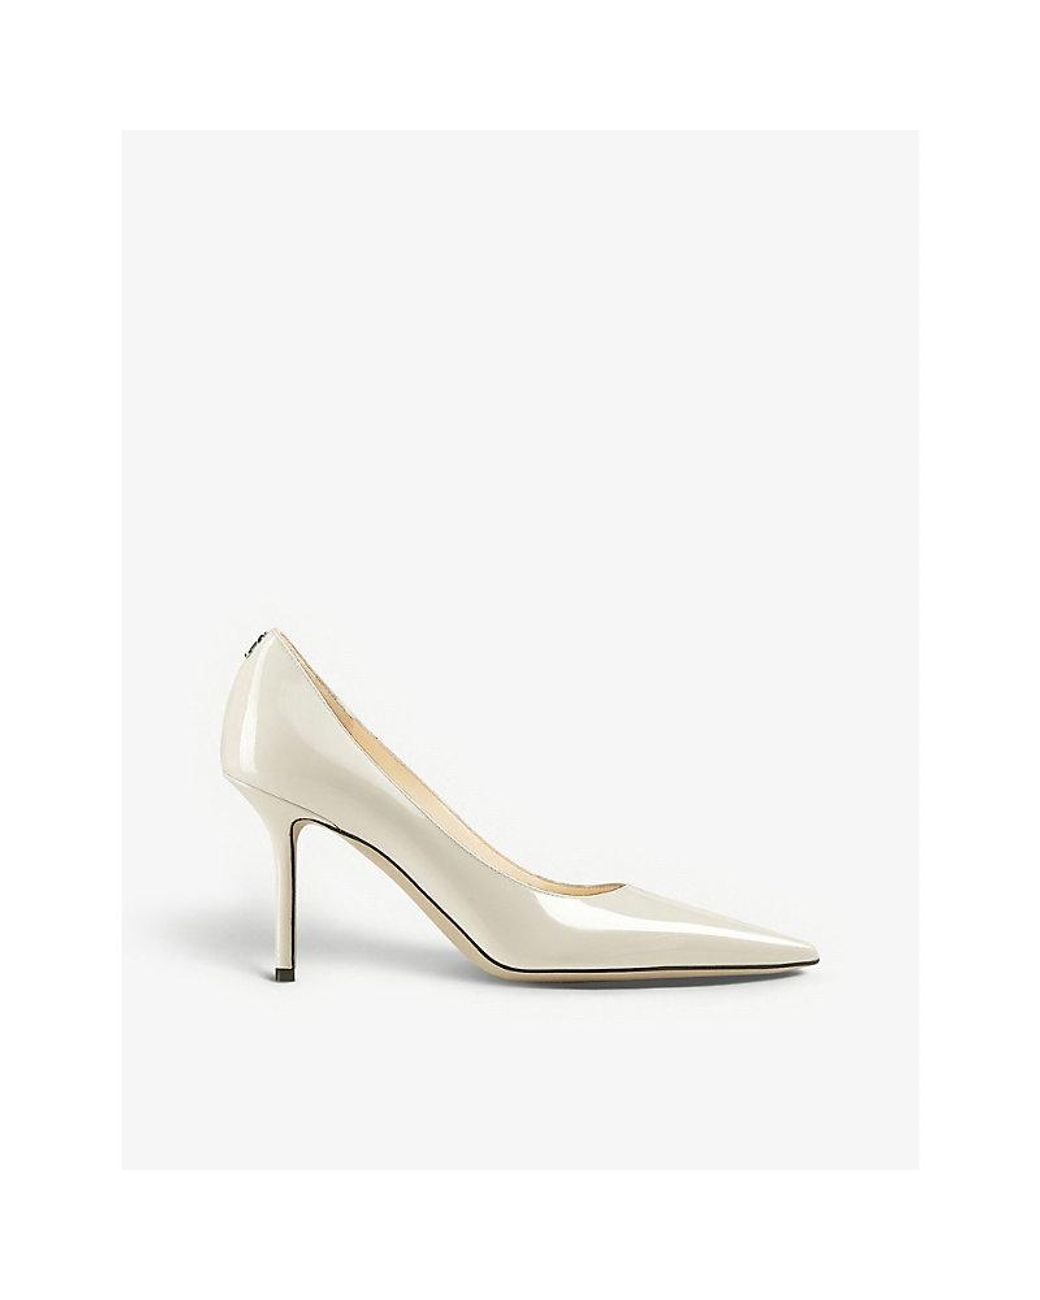 Jimmy Choo Love 85 Patent-leather Pumps in White | Lyst